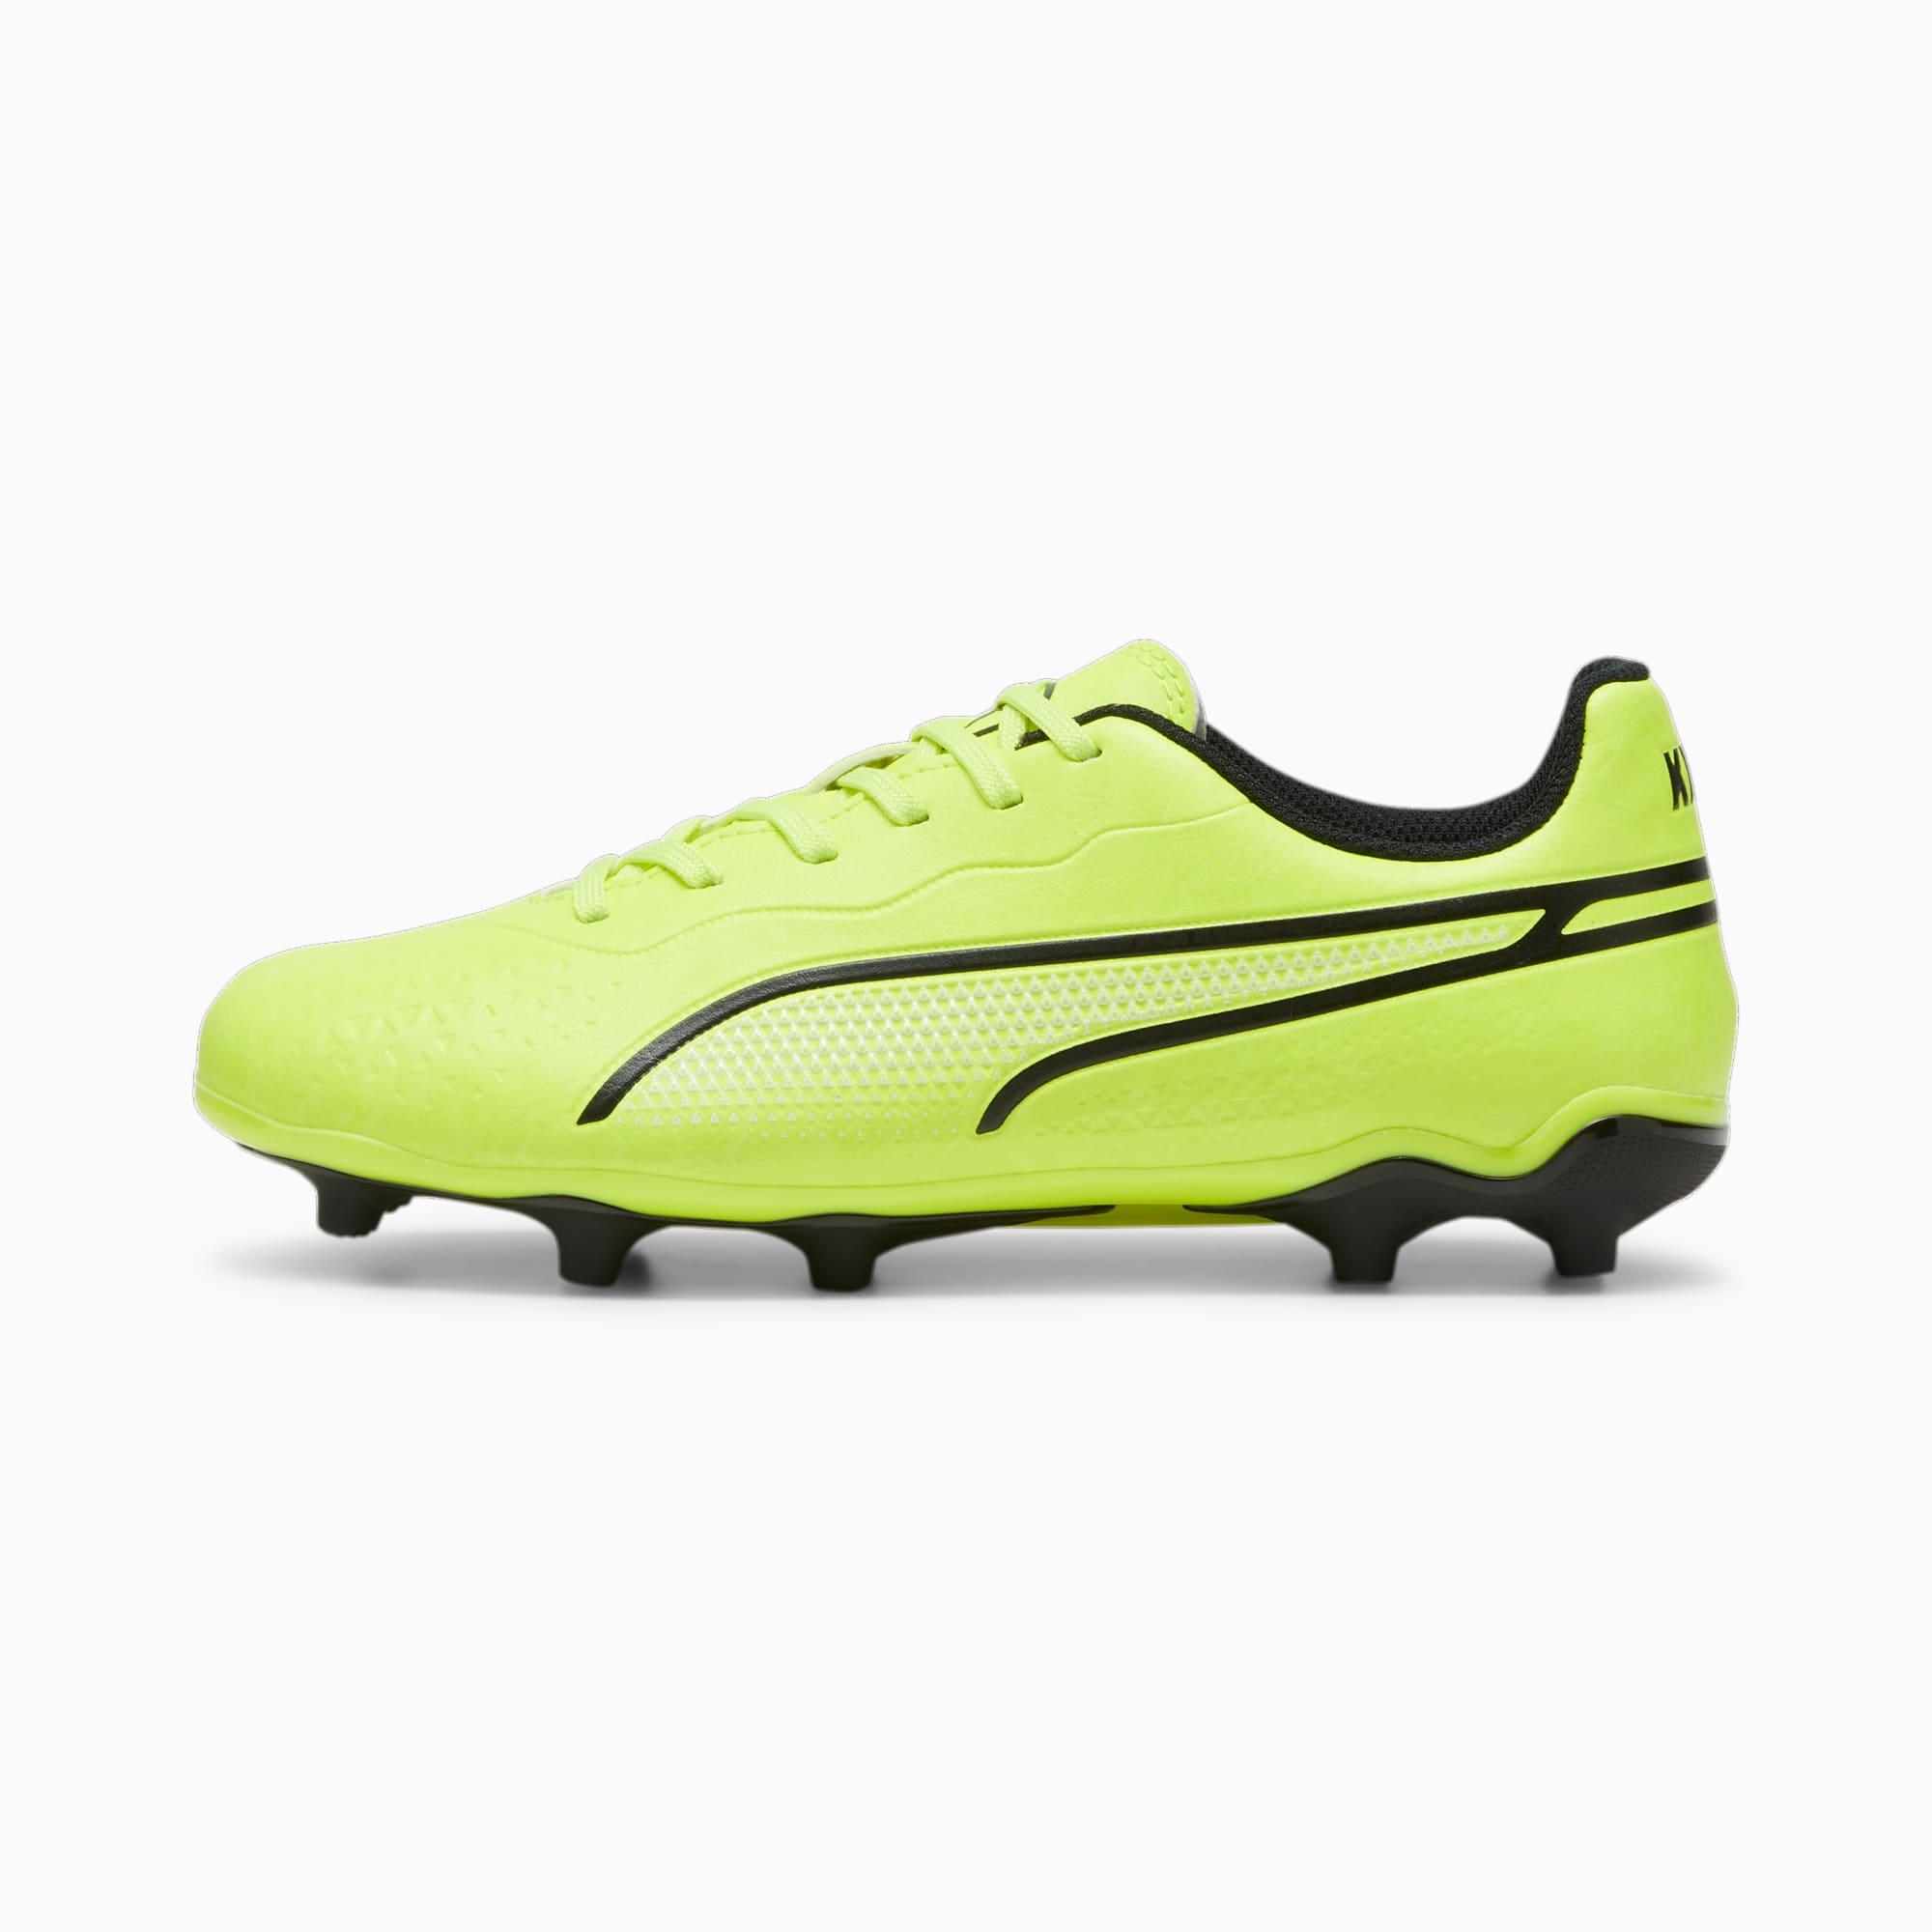 PUMA King Match FG/AG Youth Football Boots, Electric Lime/Black/Poison Pink